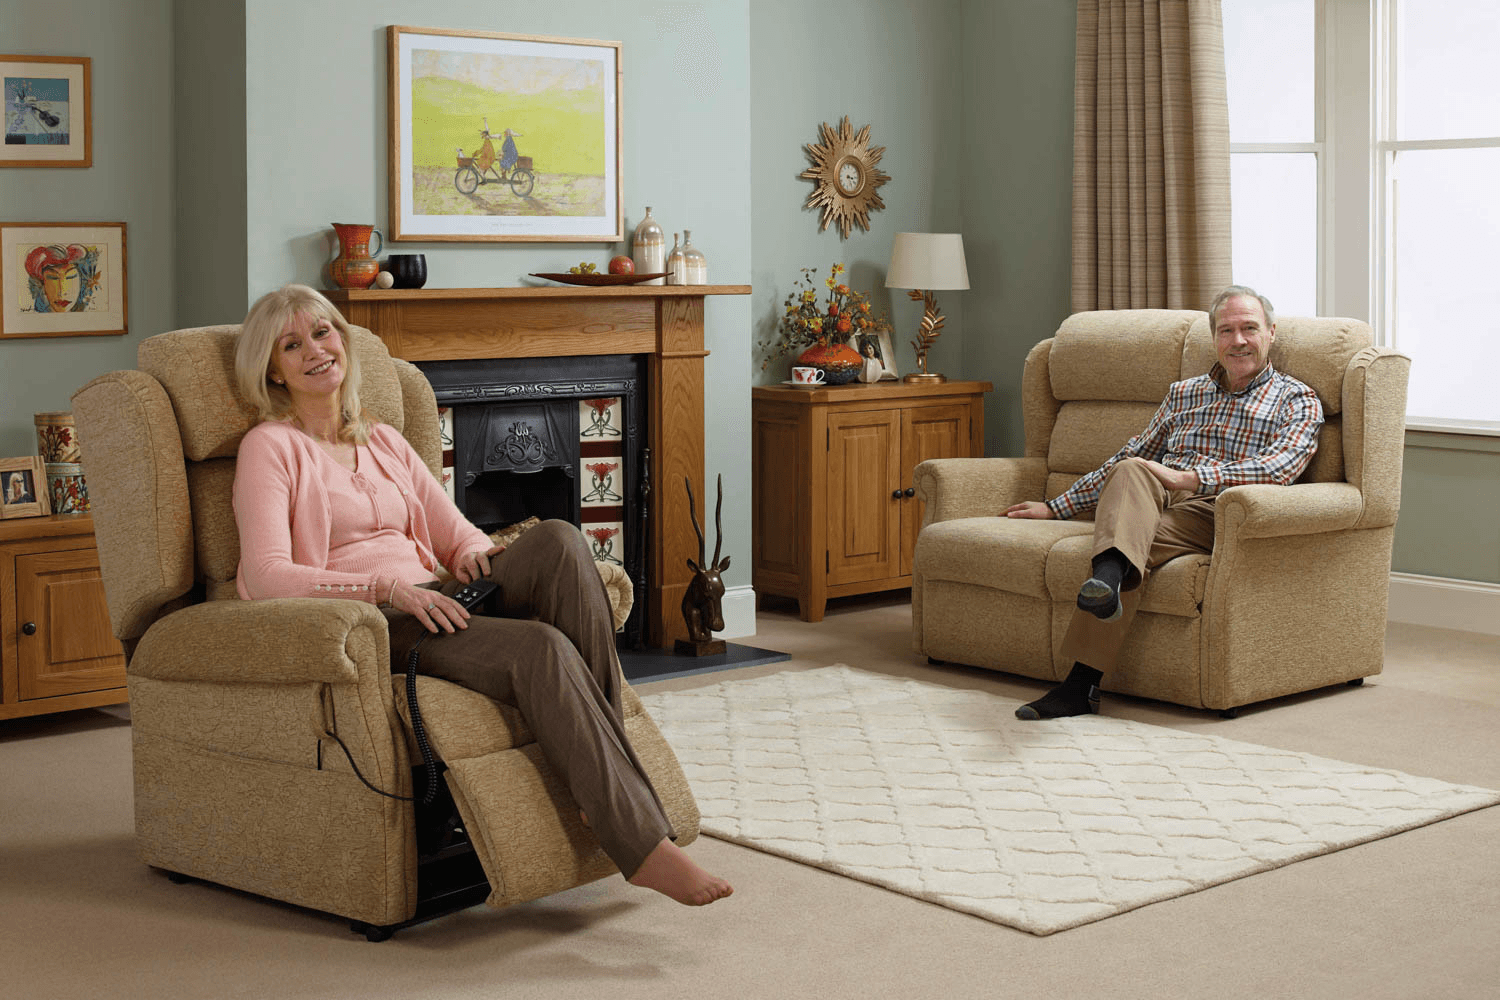 The Oak Rise and Recline Chair